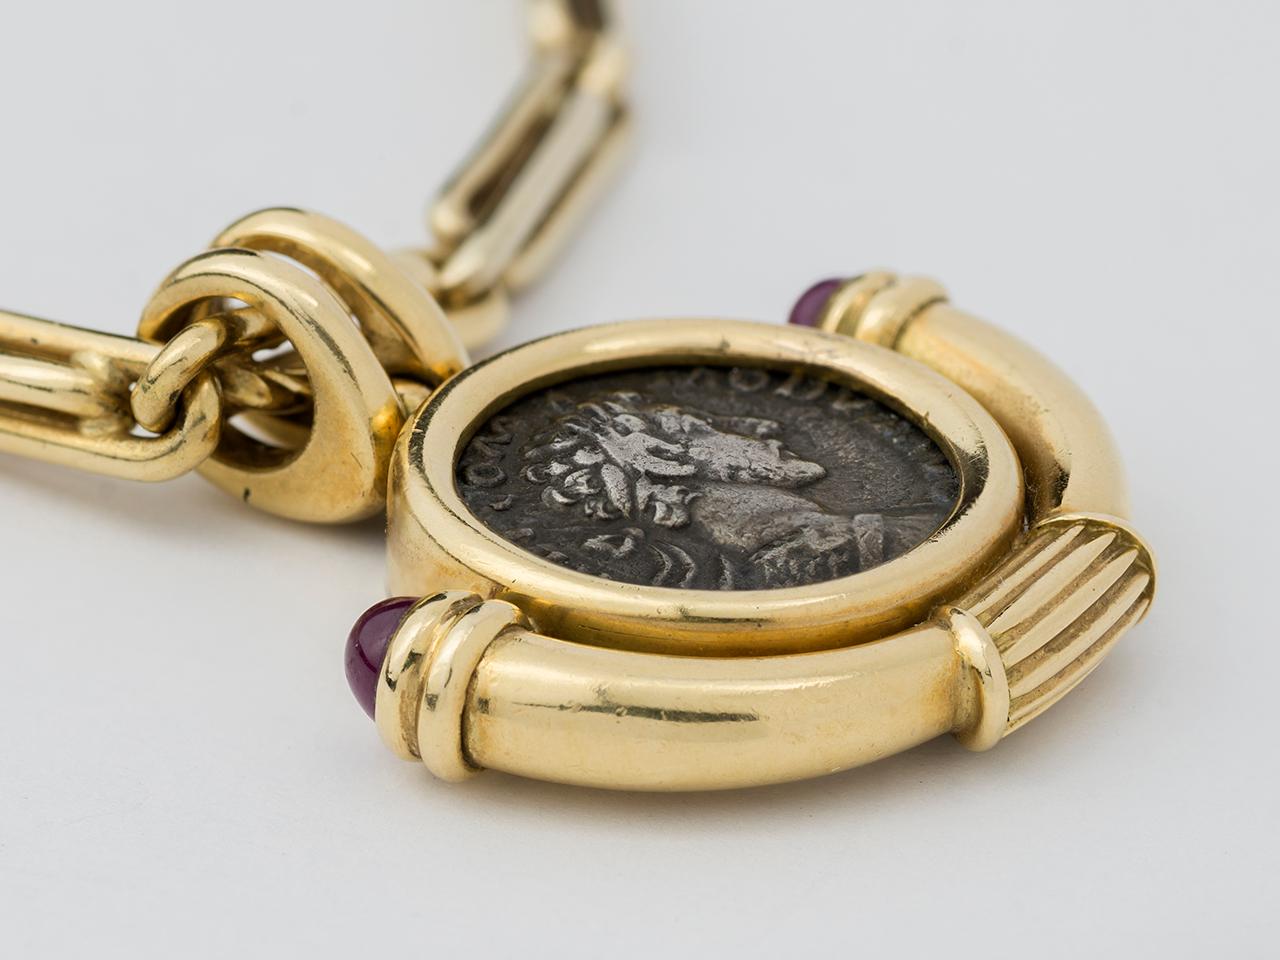 18kt gold longchain necklace, suspending an ancient coin set in a fob bezel. Necklace is 35-1/2” in length, and can be doubled. Signed BVLGARII 750. Both signed.